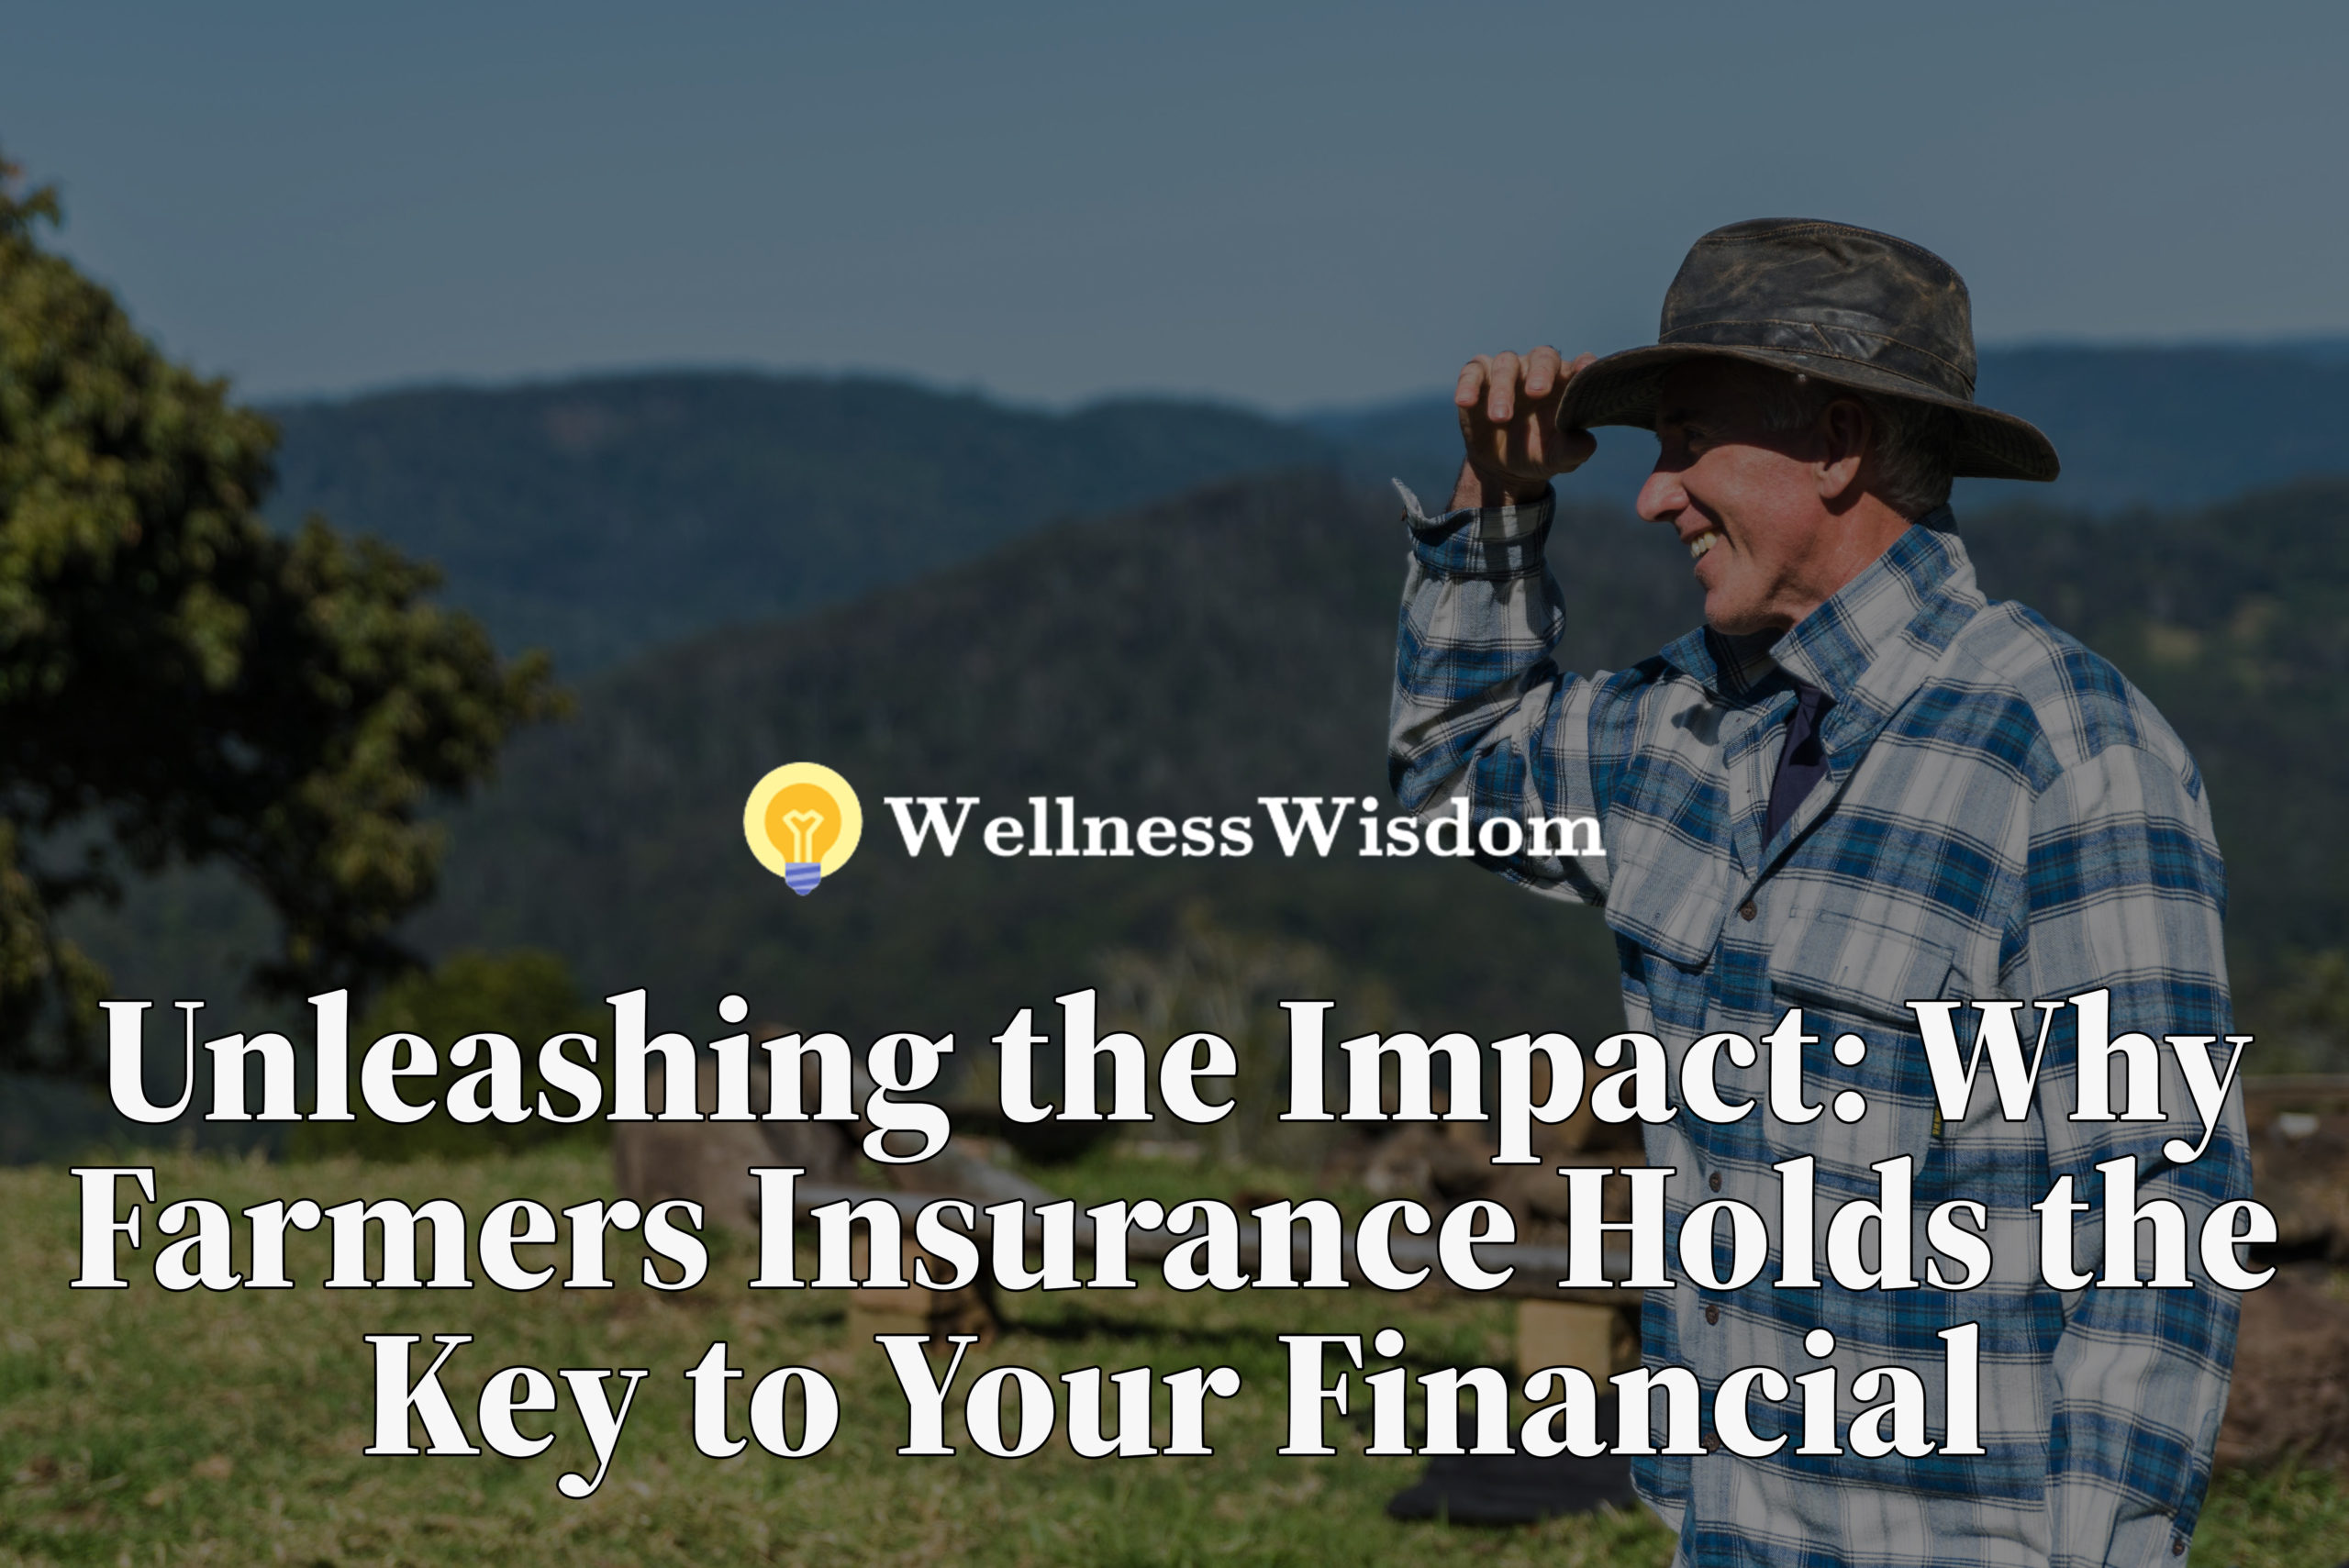 Farmers Insurance, Financial Security, Insurance Coverage, Risk Management, Legal Requirements, Peace of Mind, Insurance Policy, Deductibles, Premiums, Policy Limits, Discounts, Customer Service, Financial Stability, Asset Protection, Emergency Preparedness